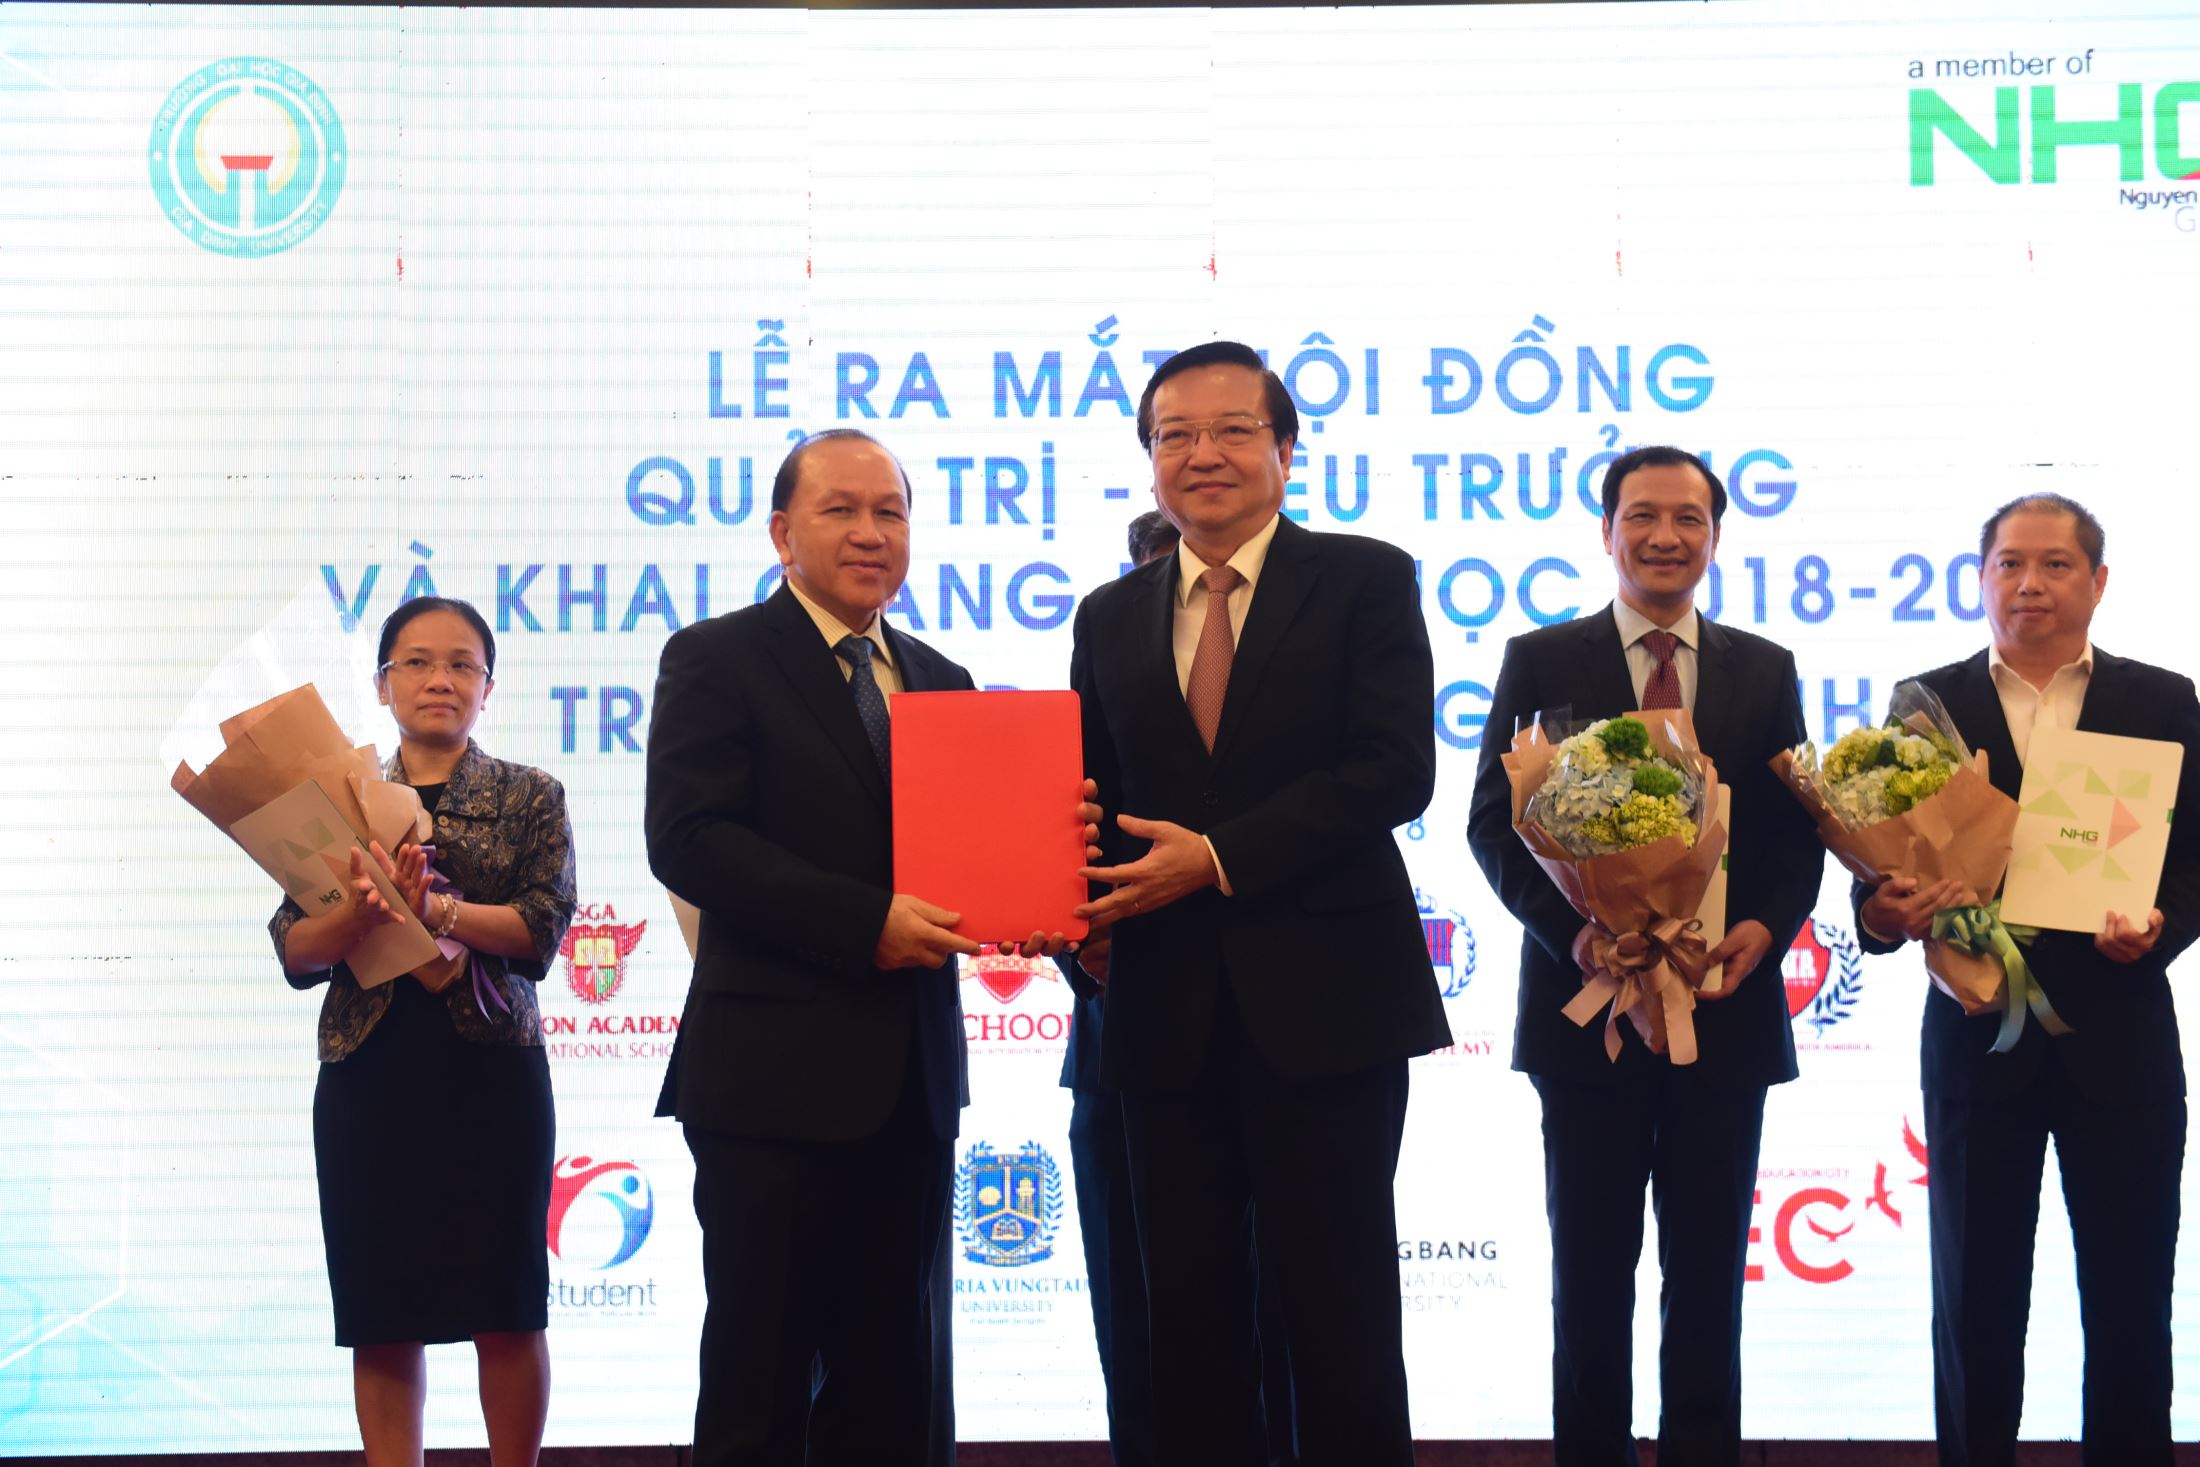 Mr. Le Hong Son, Director of Ho Chi Minh City Education and Training Department awarded the decision to recognize the president of Gia Dinh University as Dr. Ha Huu Phuc.